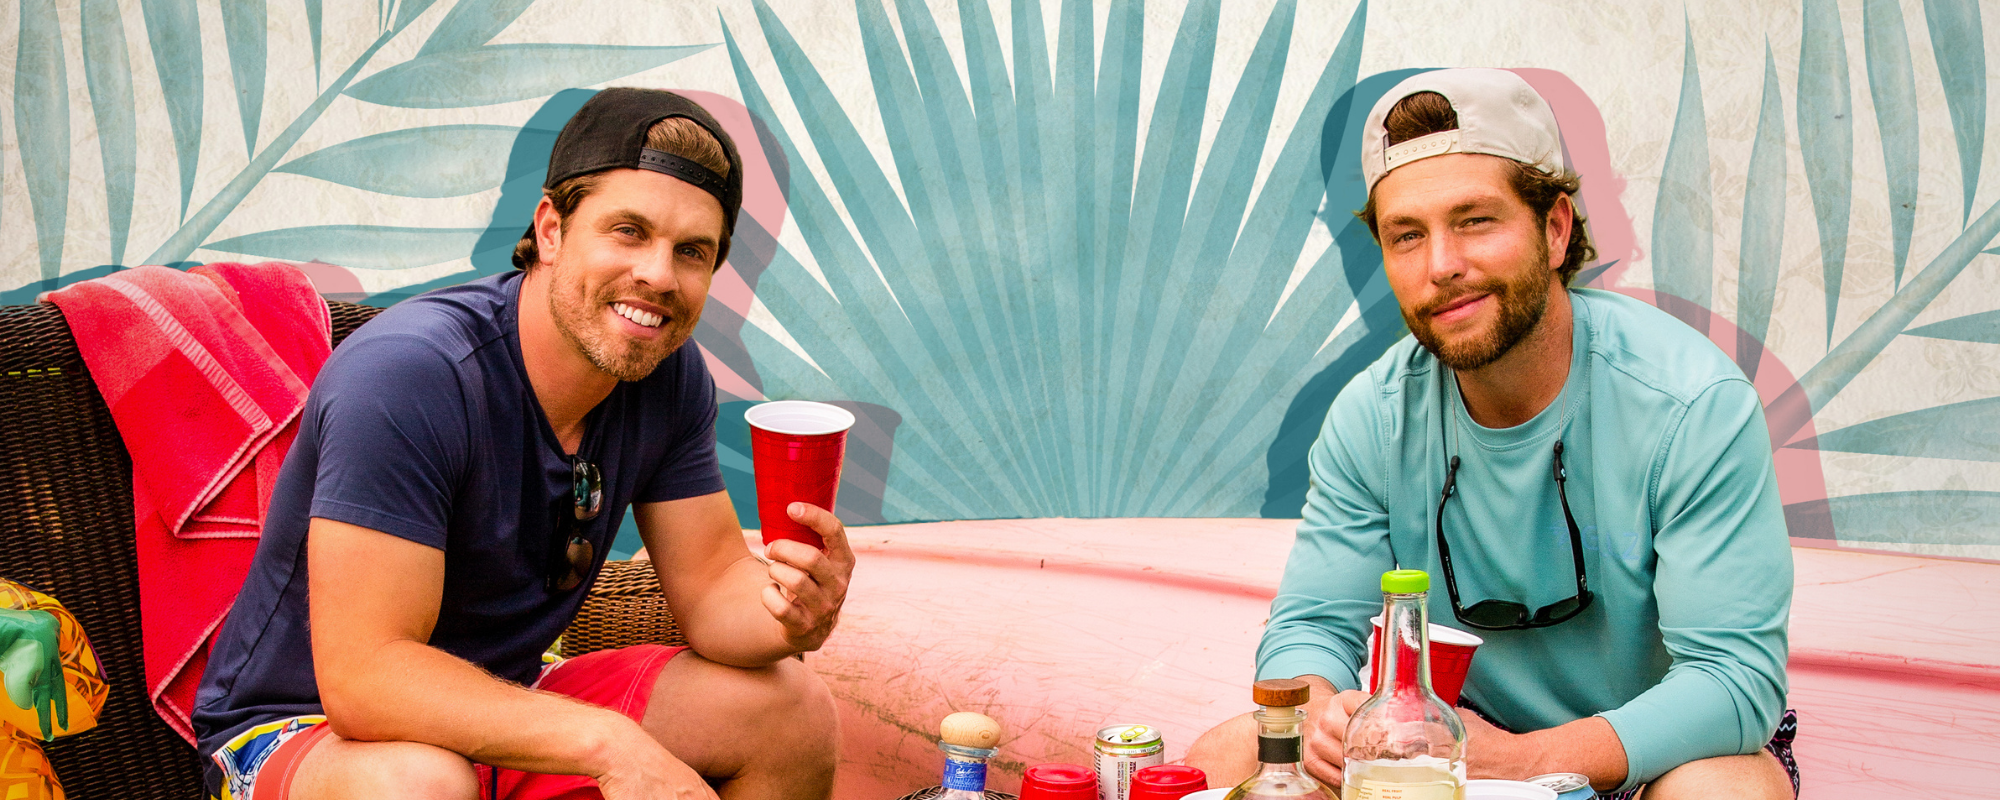 Chris Lane and Dustin Lynch Share Their 5 Favorite Things About a Day on the Water to Celebrate New Single “Tequila On A Boat”